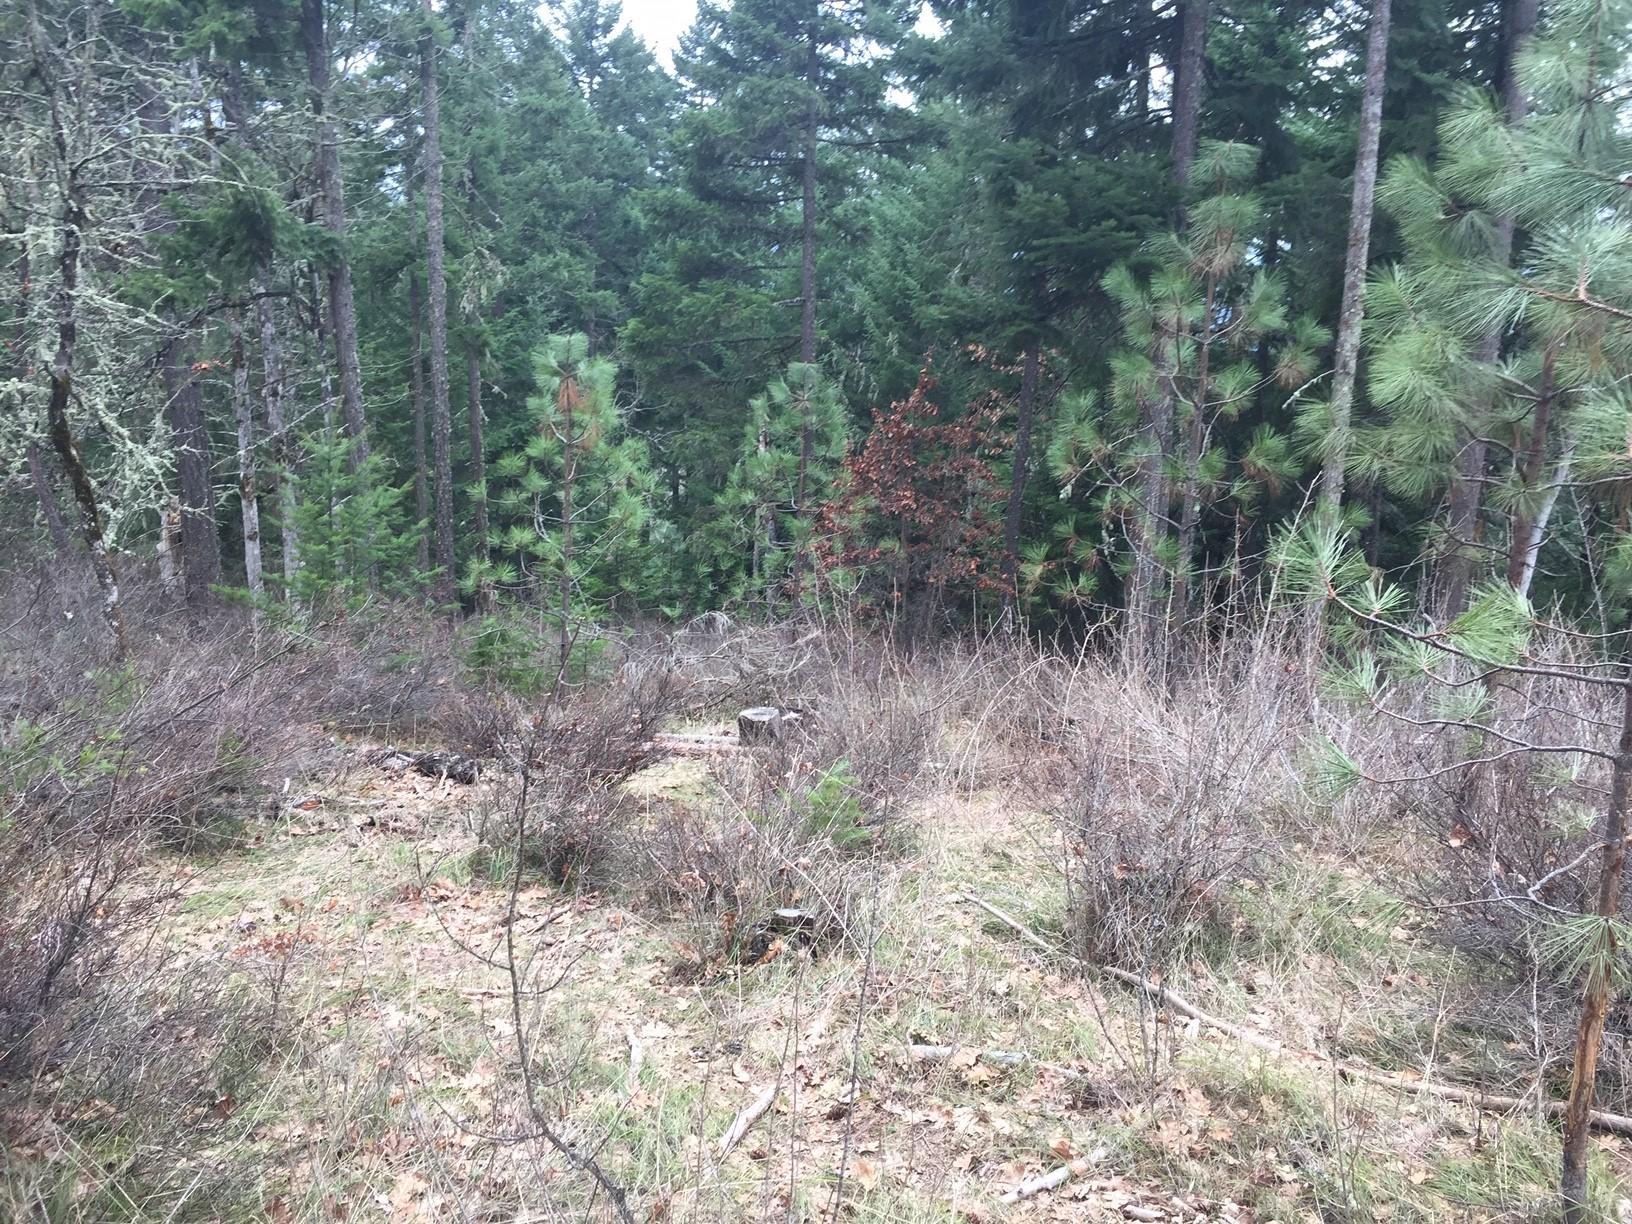 A barren hillside illustrates how Douglas-fir are dying out in shallow rocky soils.